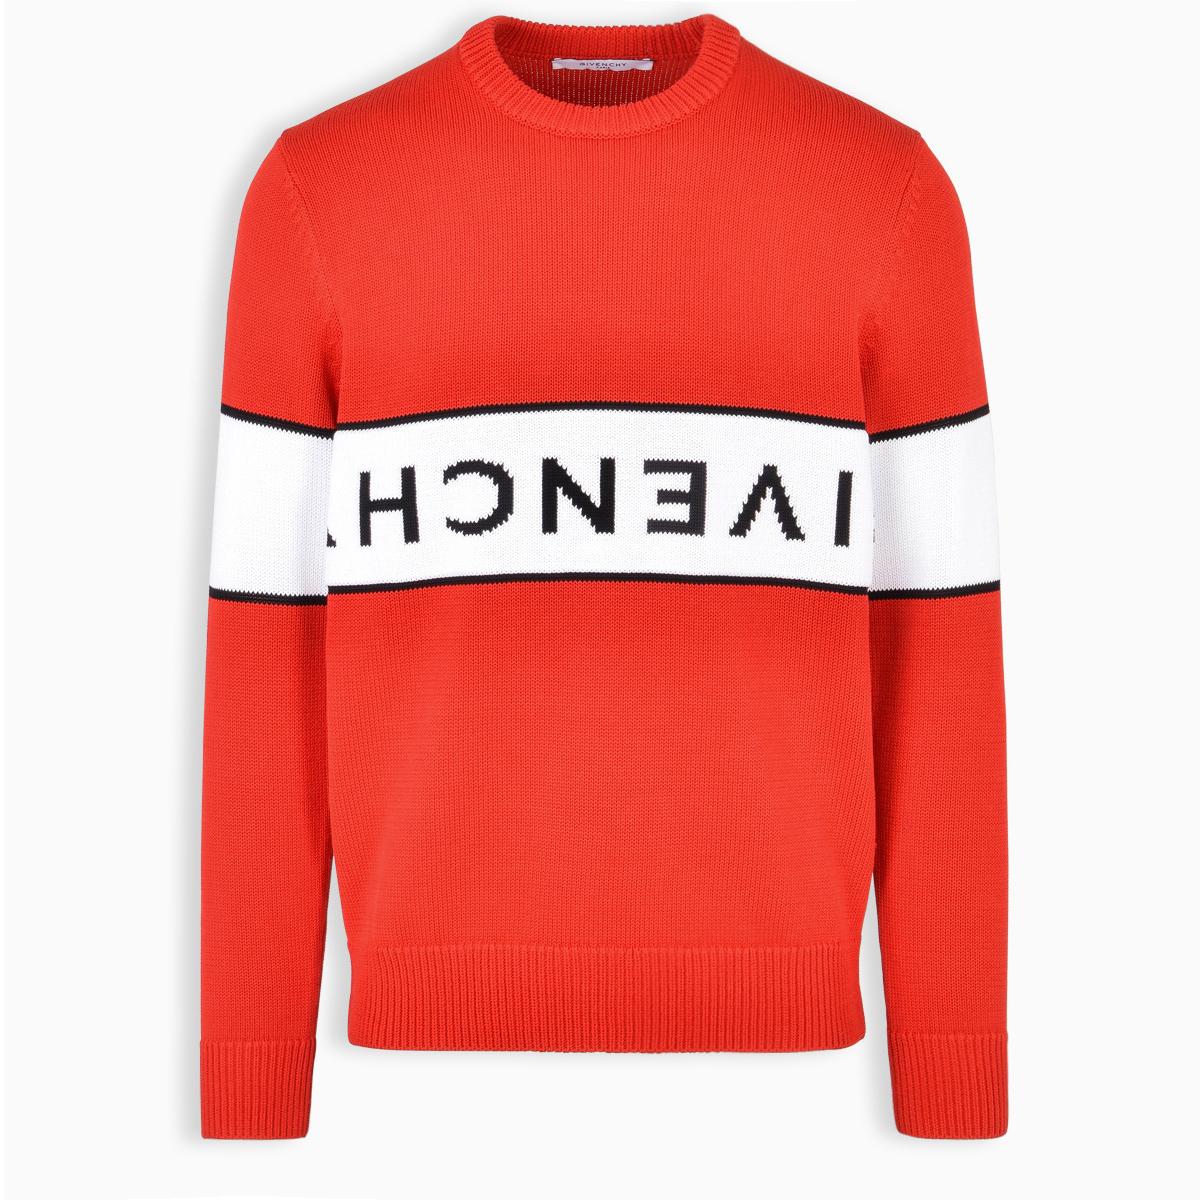 Givenchy Cotton Reverse Sweater in Red/White (Red) for Men - Lyst